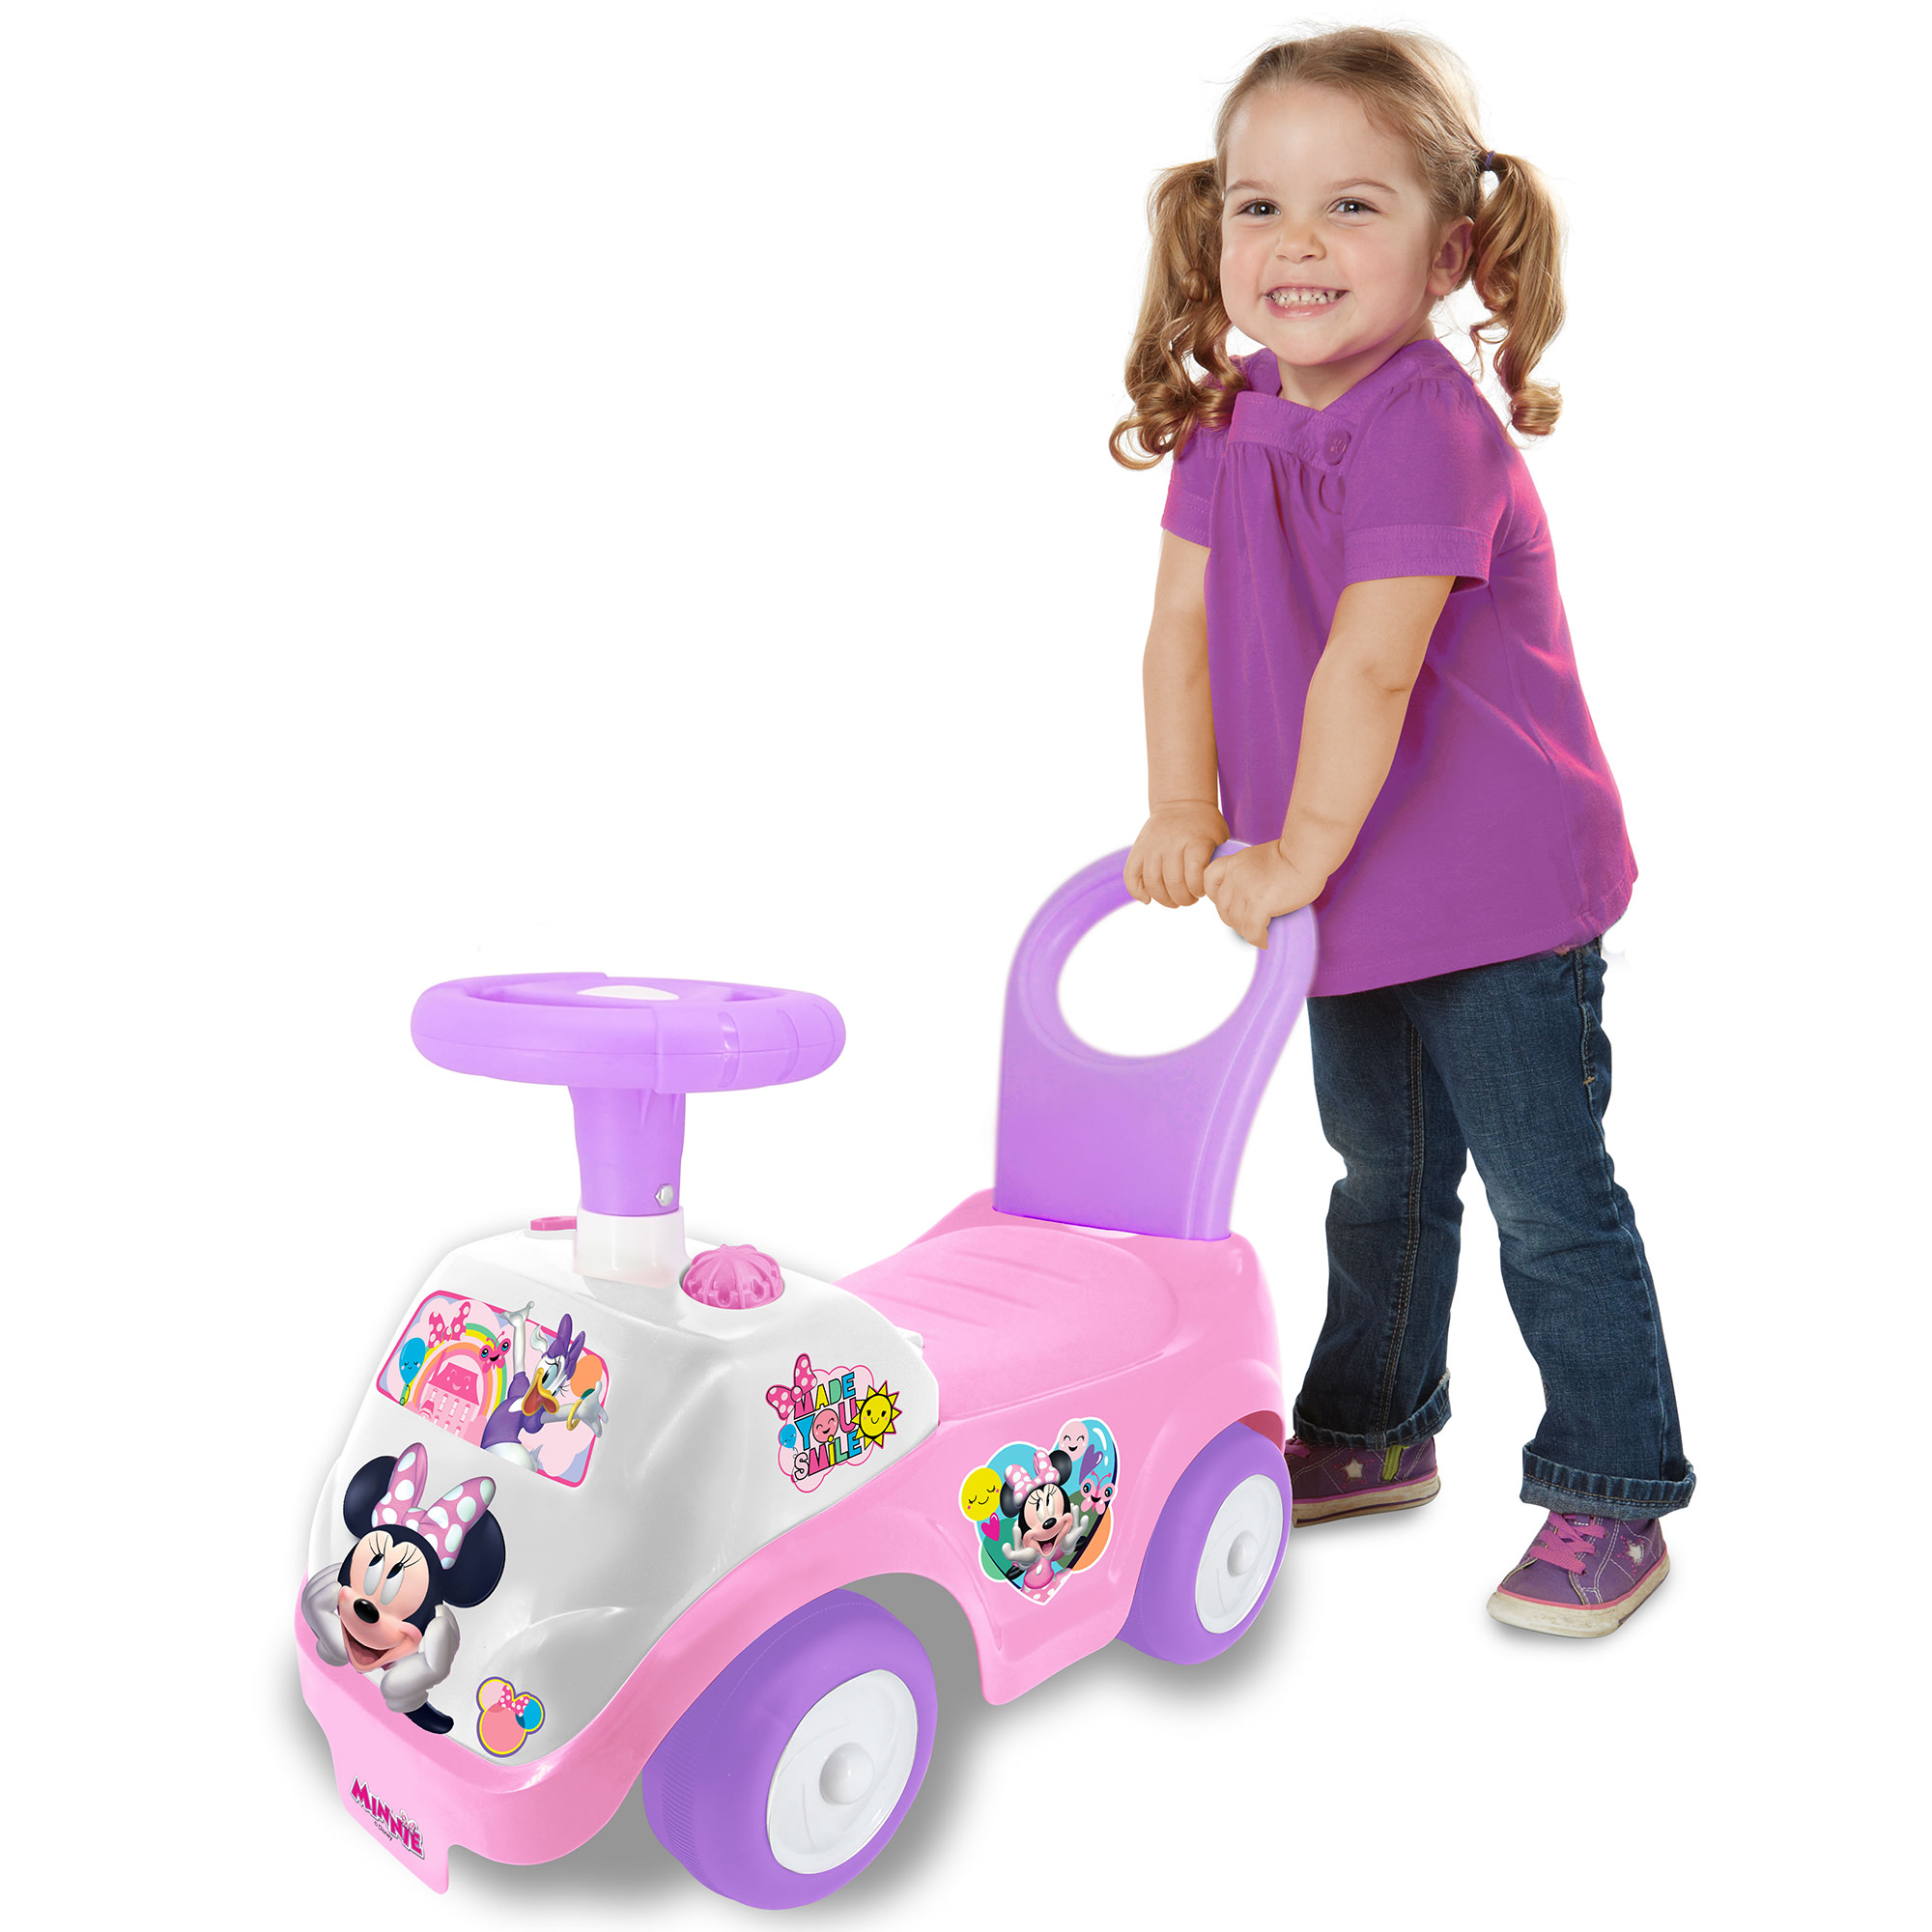 Kiddieland Disney Lights 'N' Sounds Ride-On: Minnie Mouse Kids Interactive Push Toy Car, Foot To Floor, Toddlers, Ages 12-36 Months - image 3 of 5